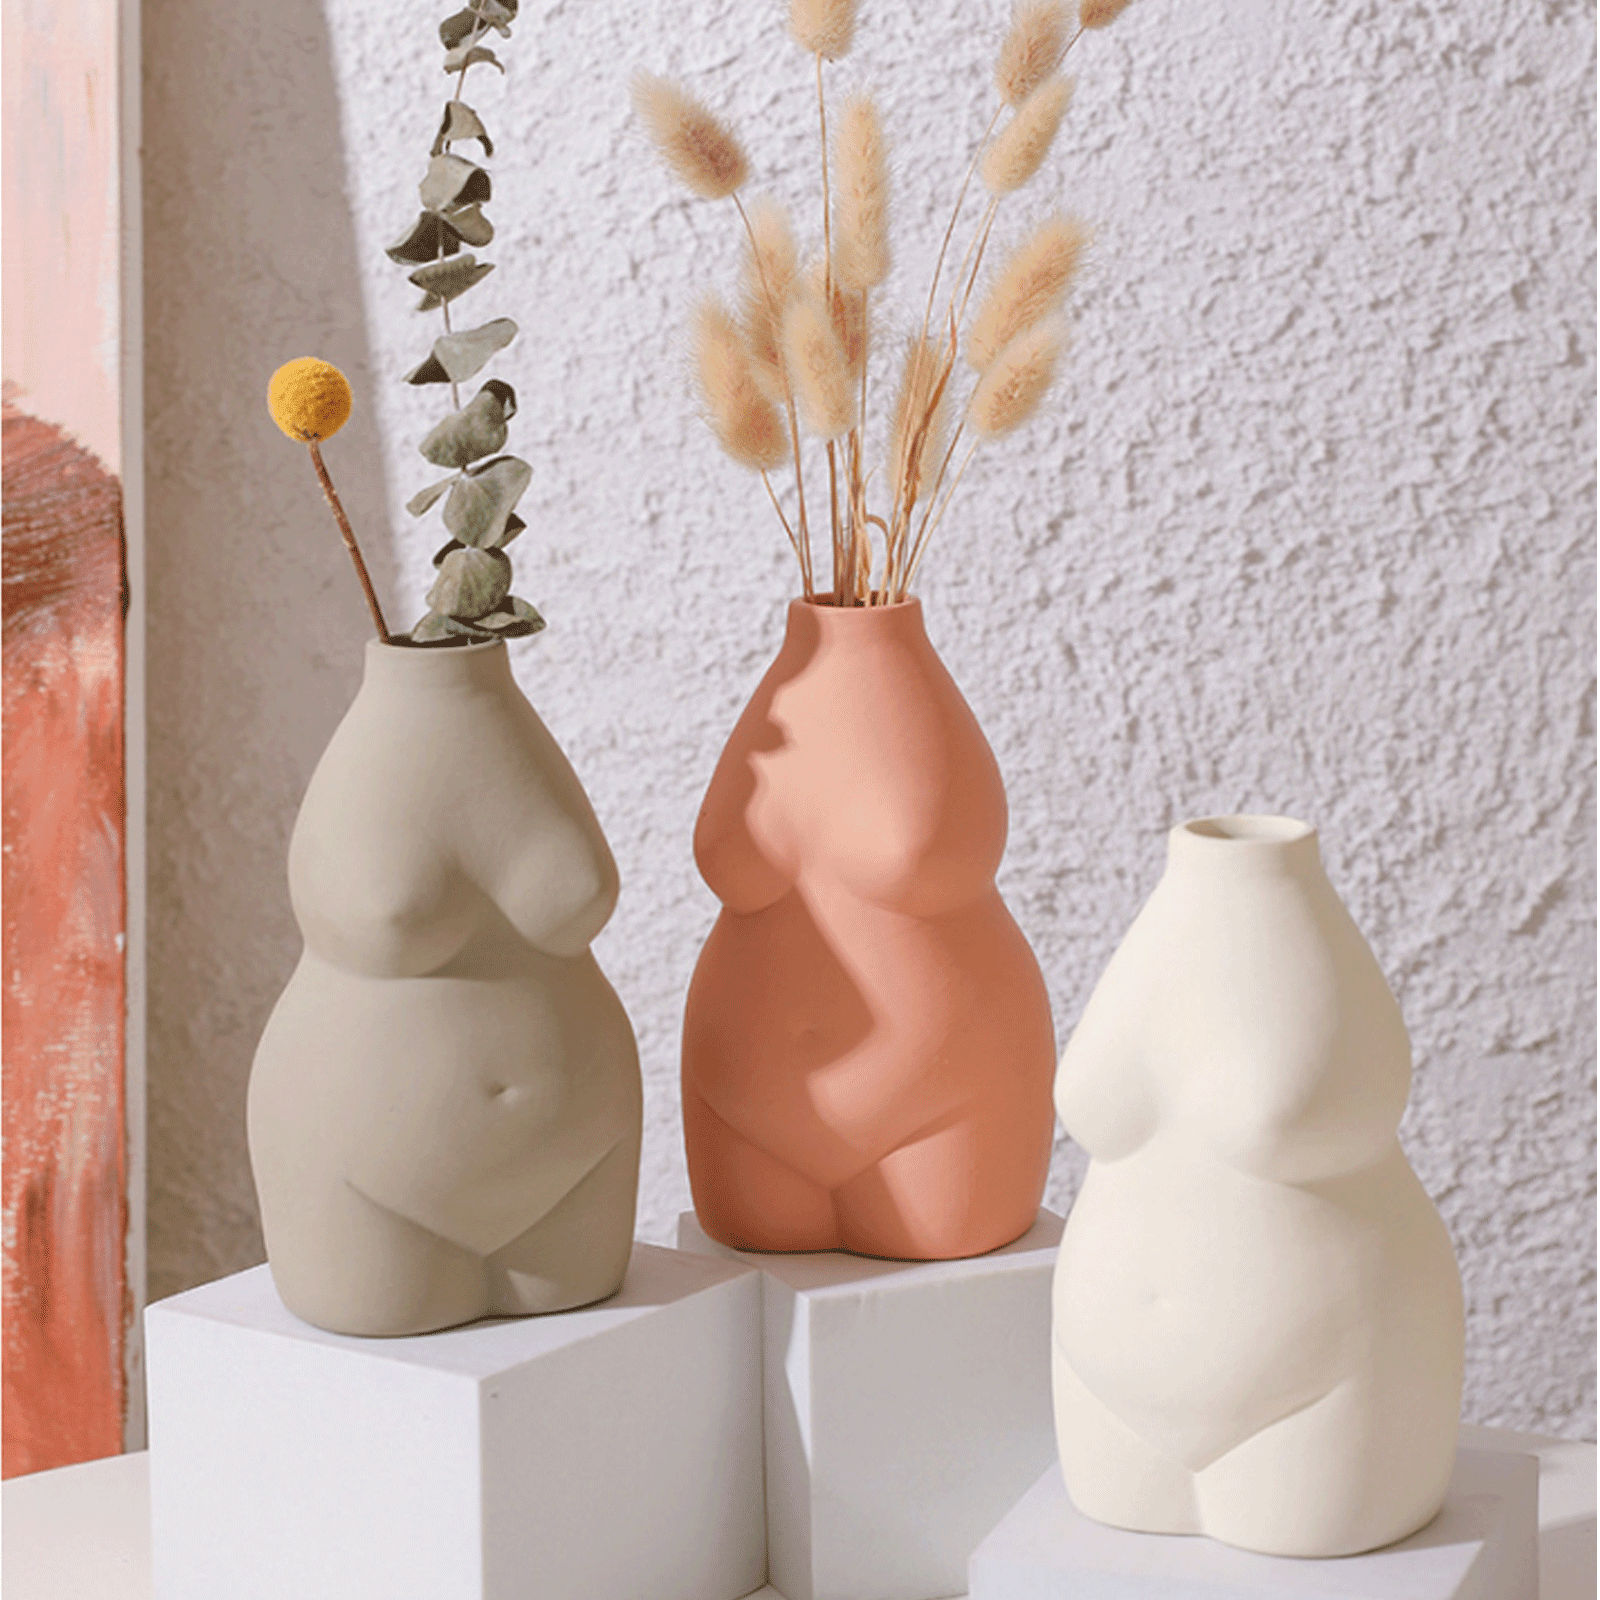 Tabletop Ceramic Flower Vase for Décor Lady Butt Vase Human Body Shaped Art Creative Decorative Flower Pot with Side Ring Handle for Home Wedding Christmas Decoration Frosted White 